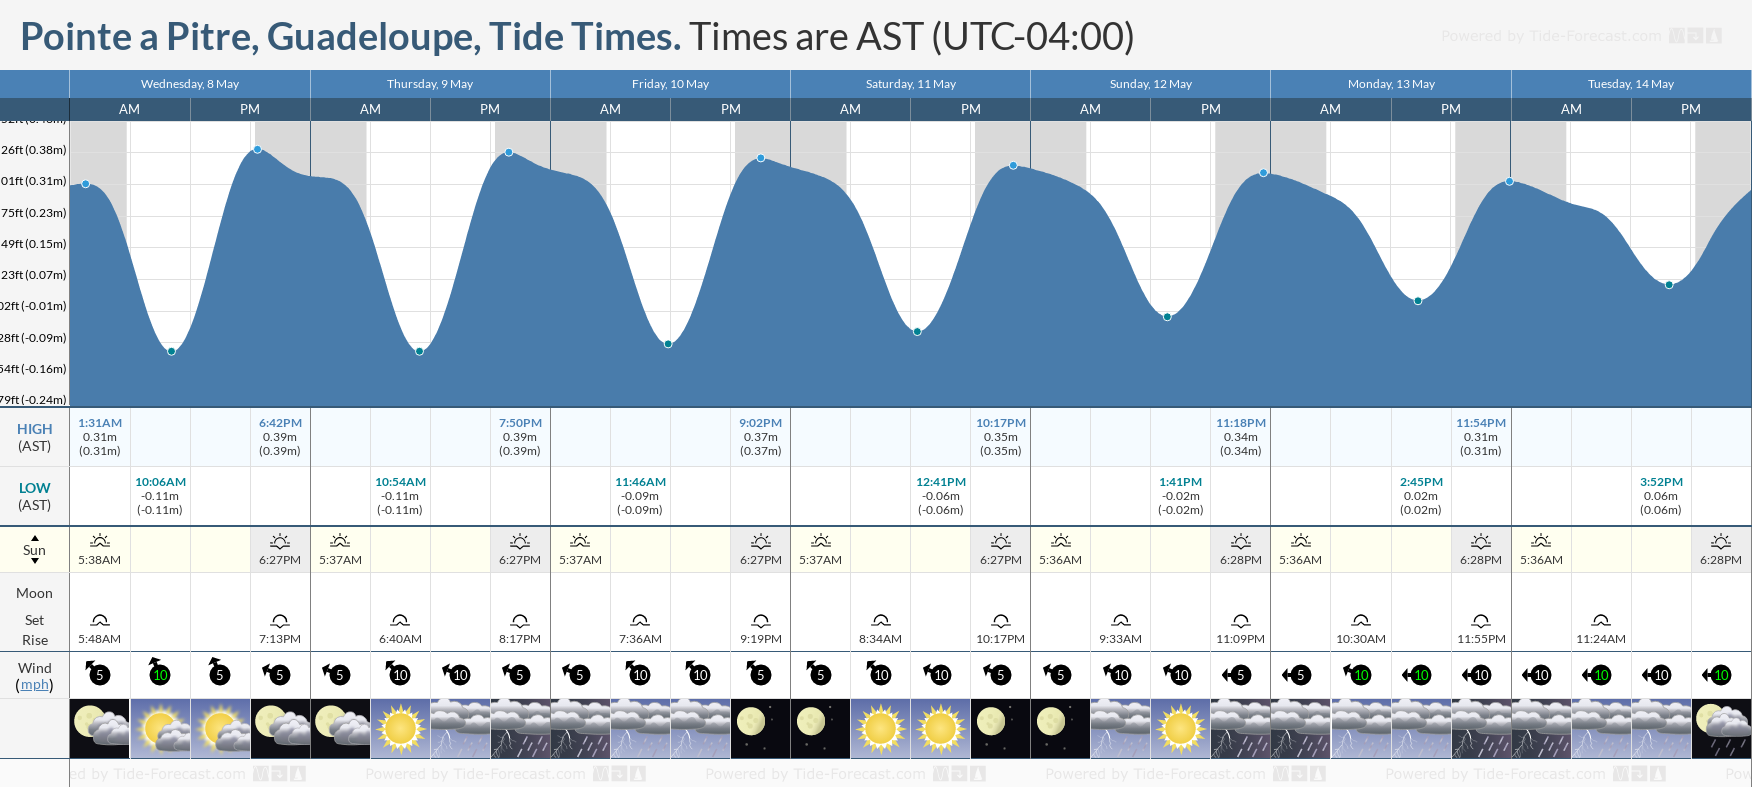 Pointe a Pitre, Guadeloupe Tide Chart including high and low tide tide times for the next 7 days